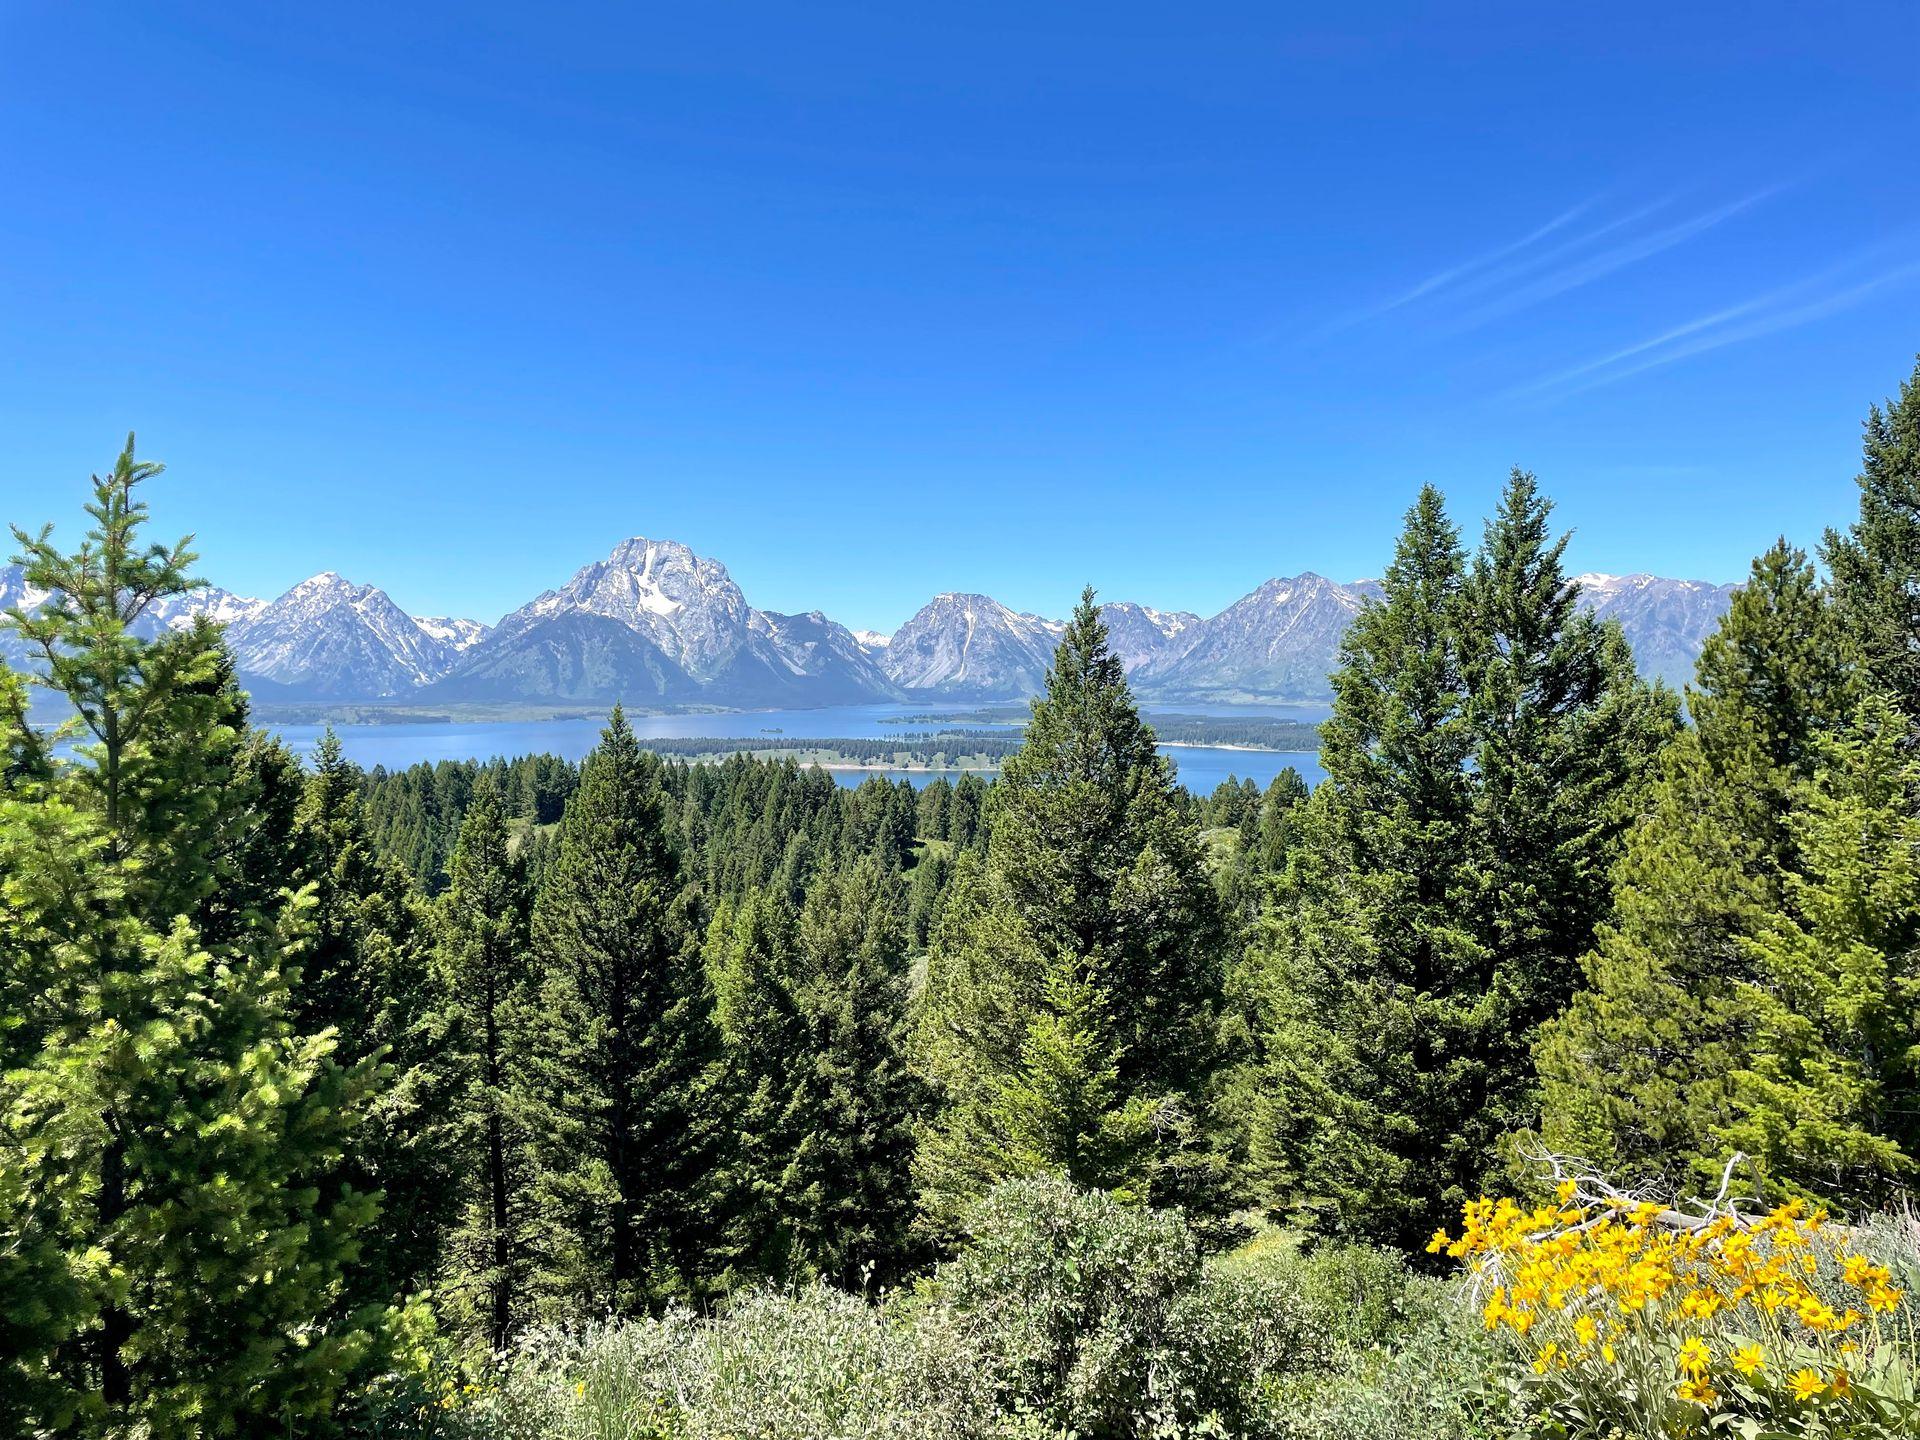 A forest full of pine trees in the foreground. In the distance, there is a lake and the Grand Teton mountains in the background.